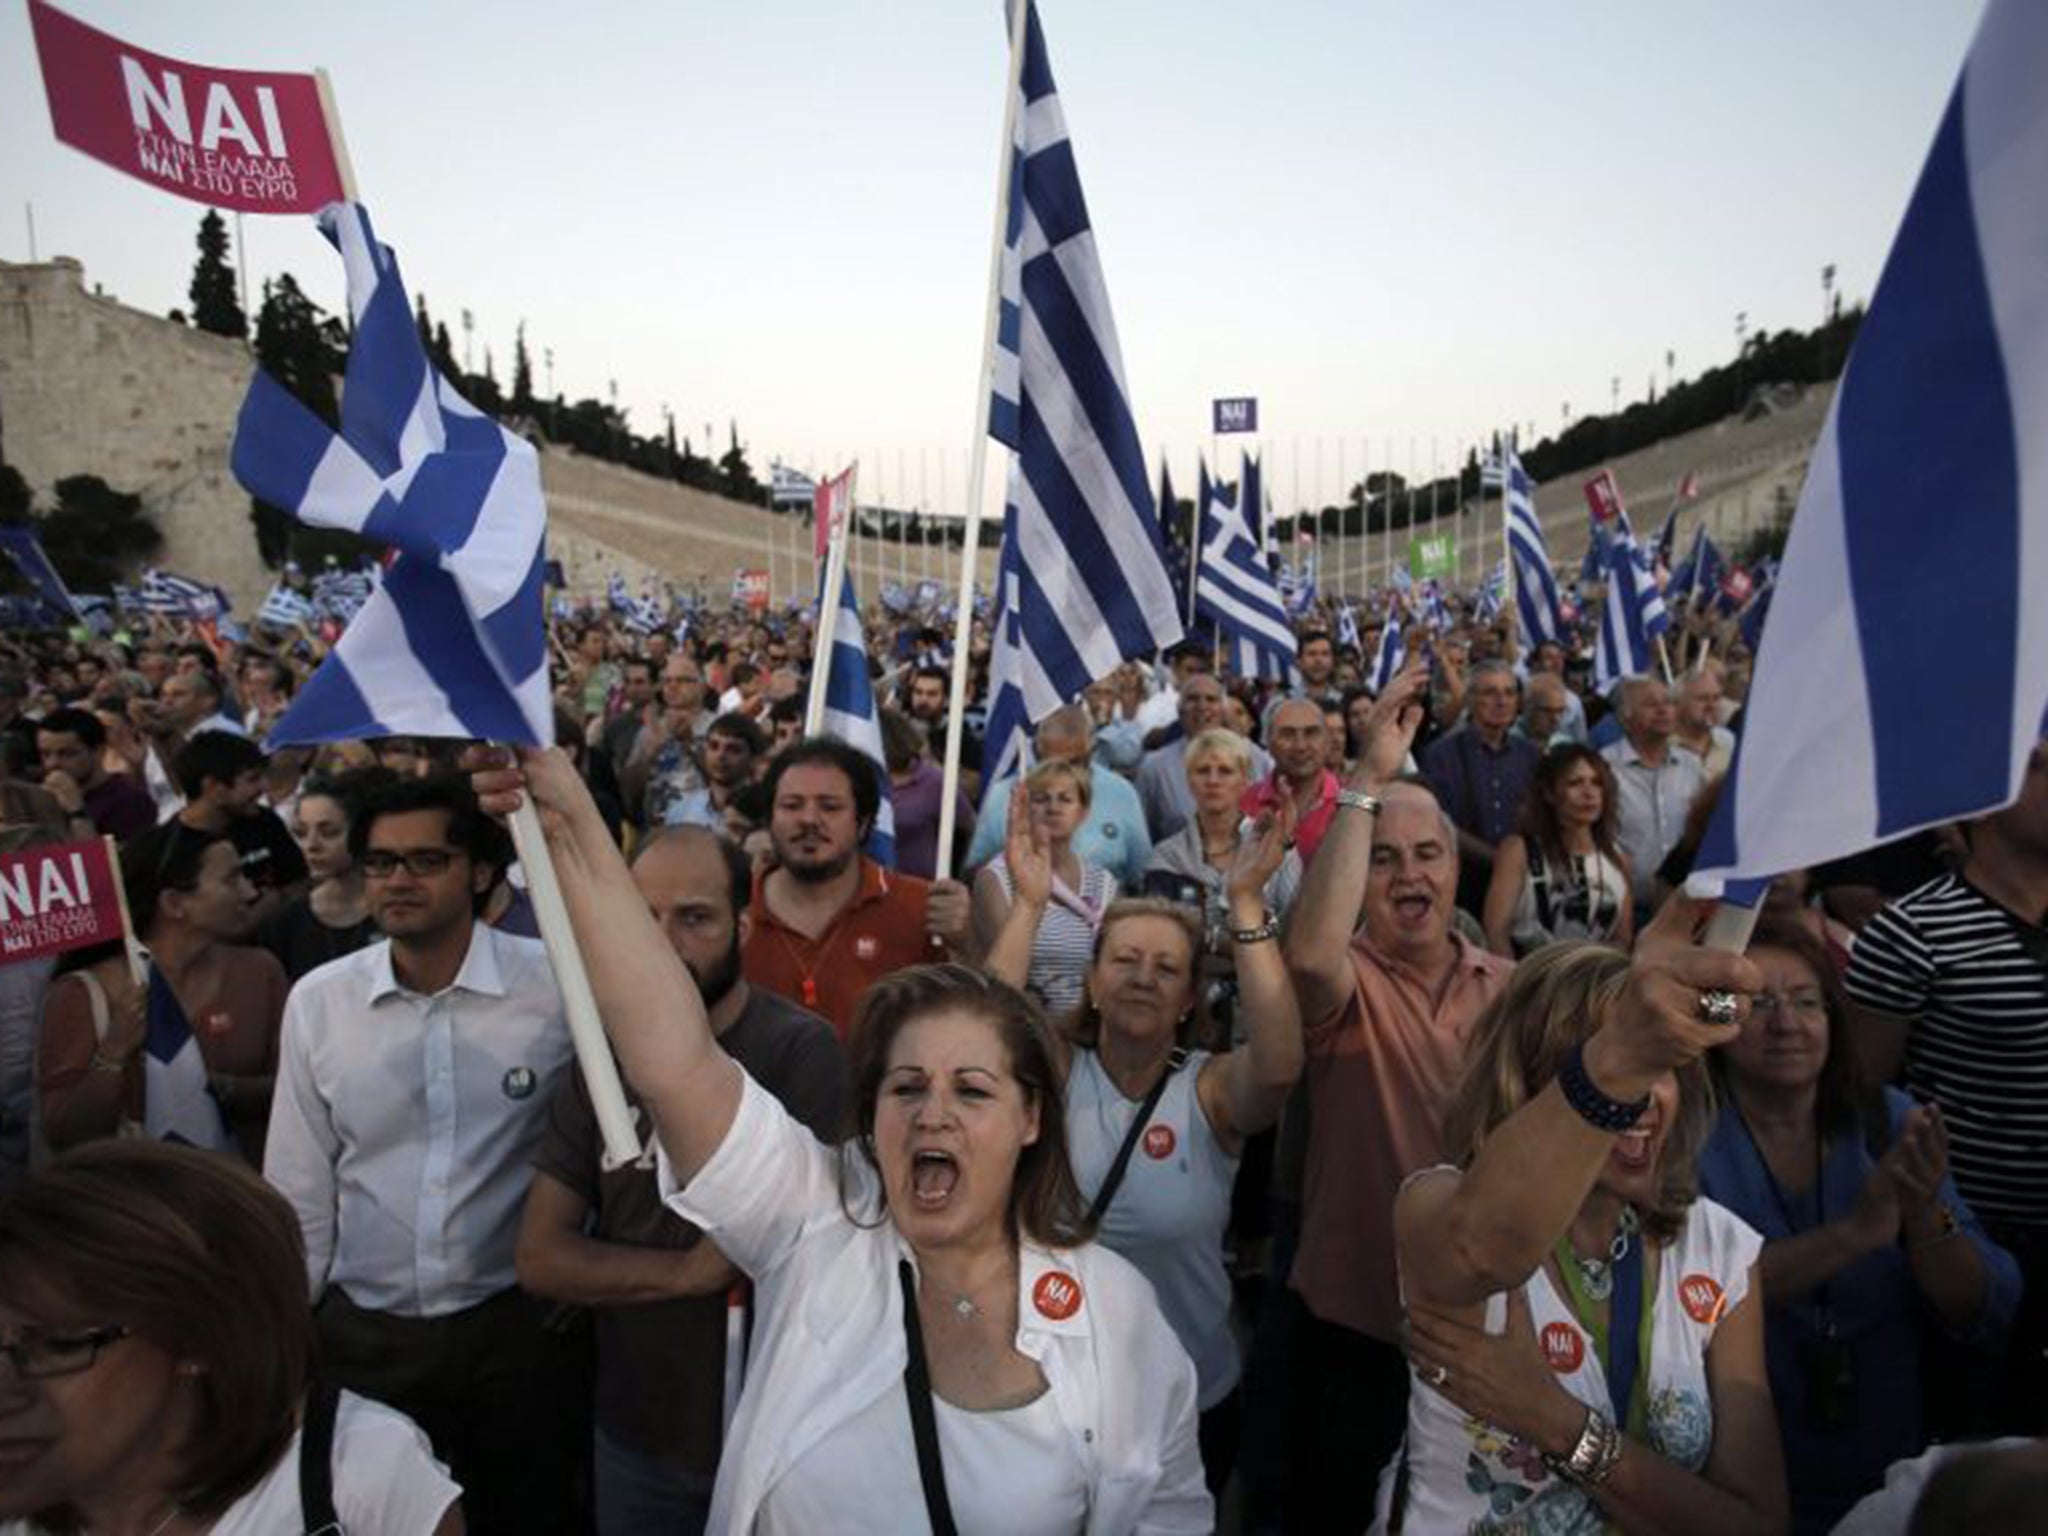 A Yes vote rally in Athens